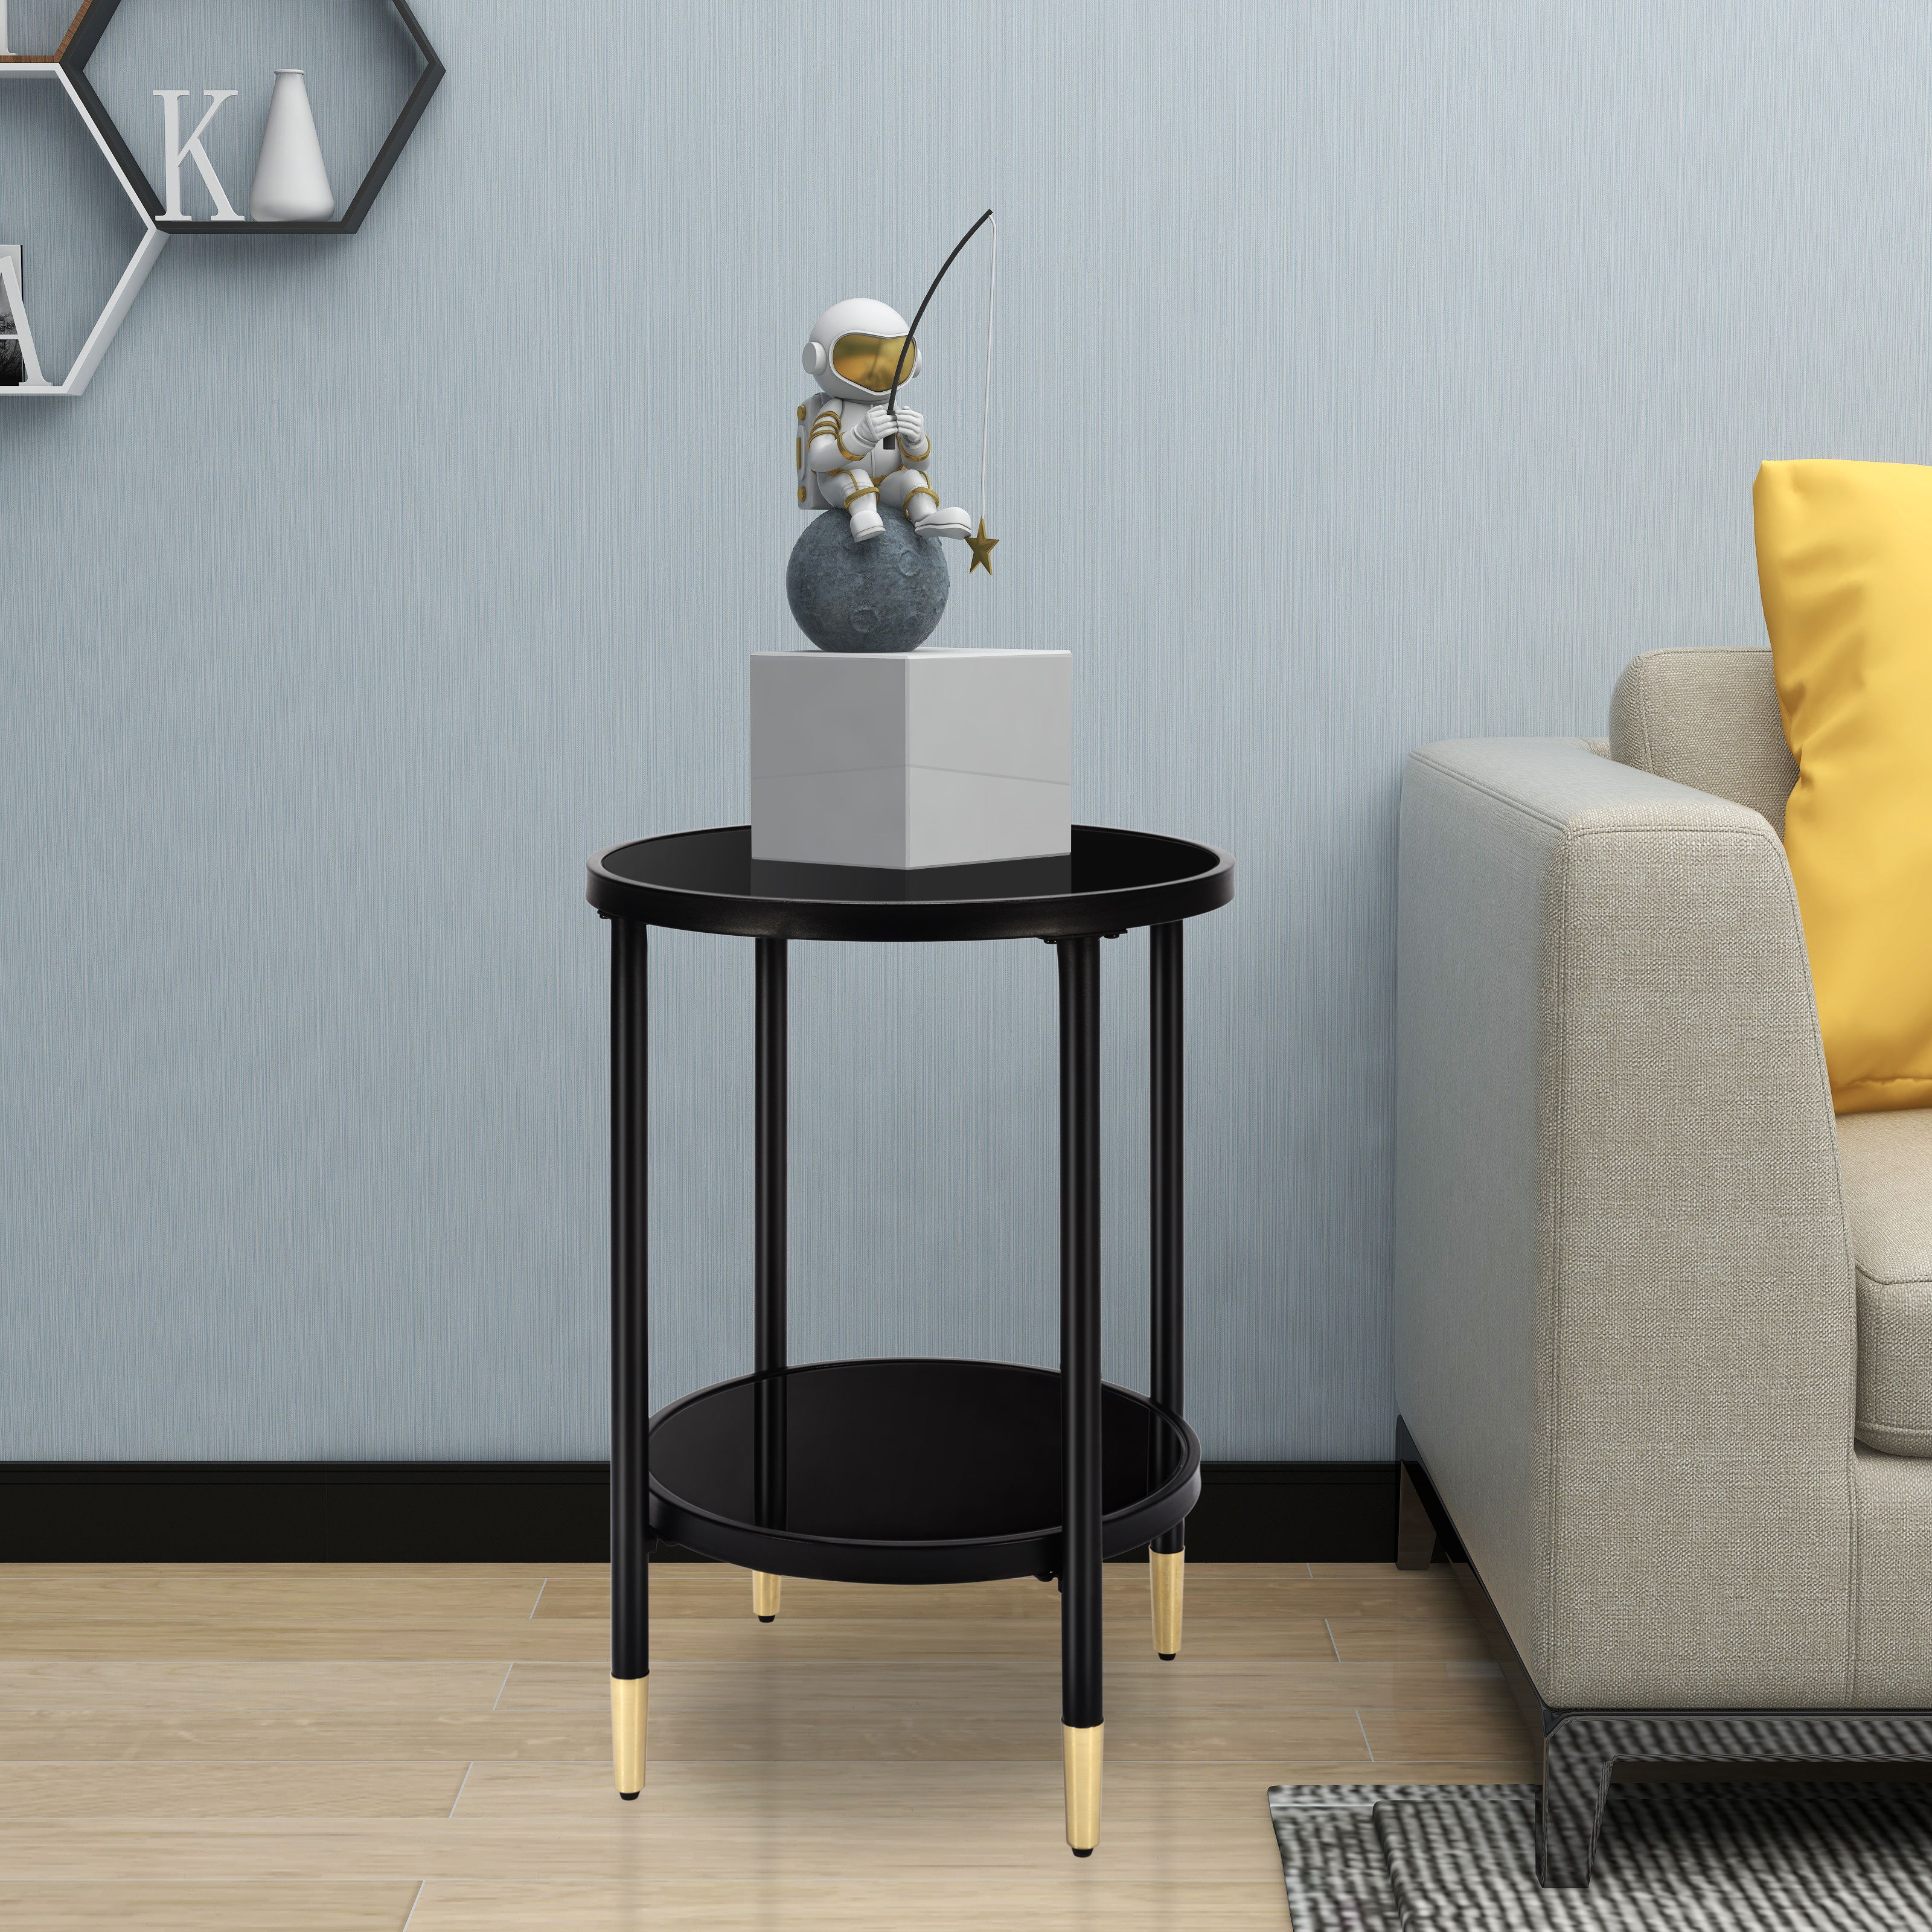 17.7" Round End Table